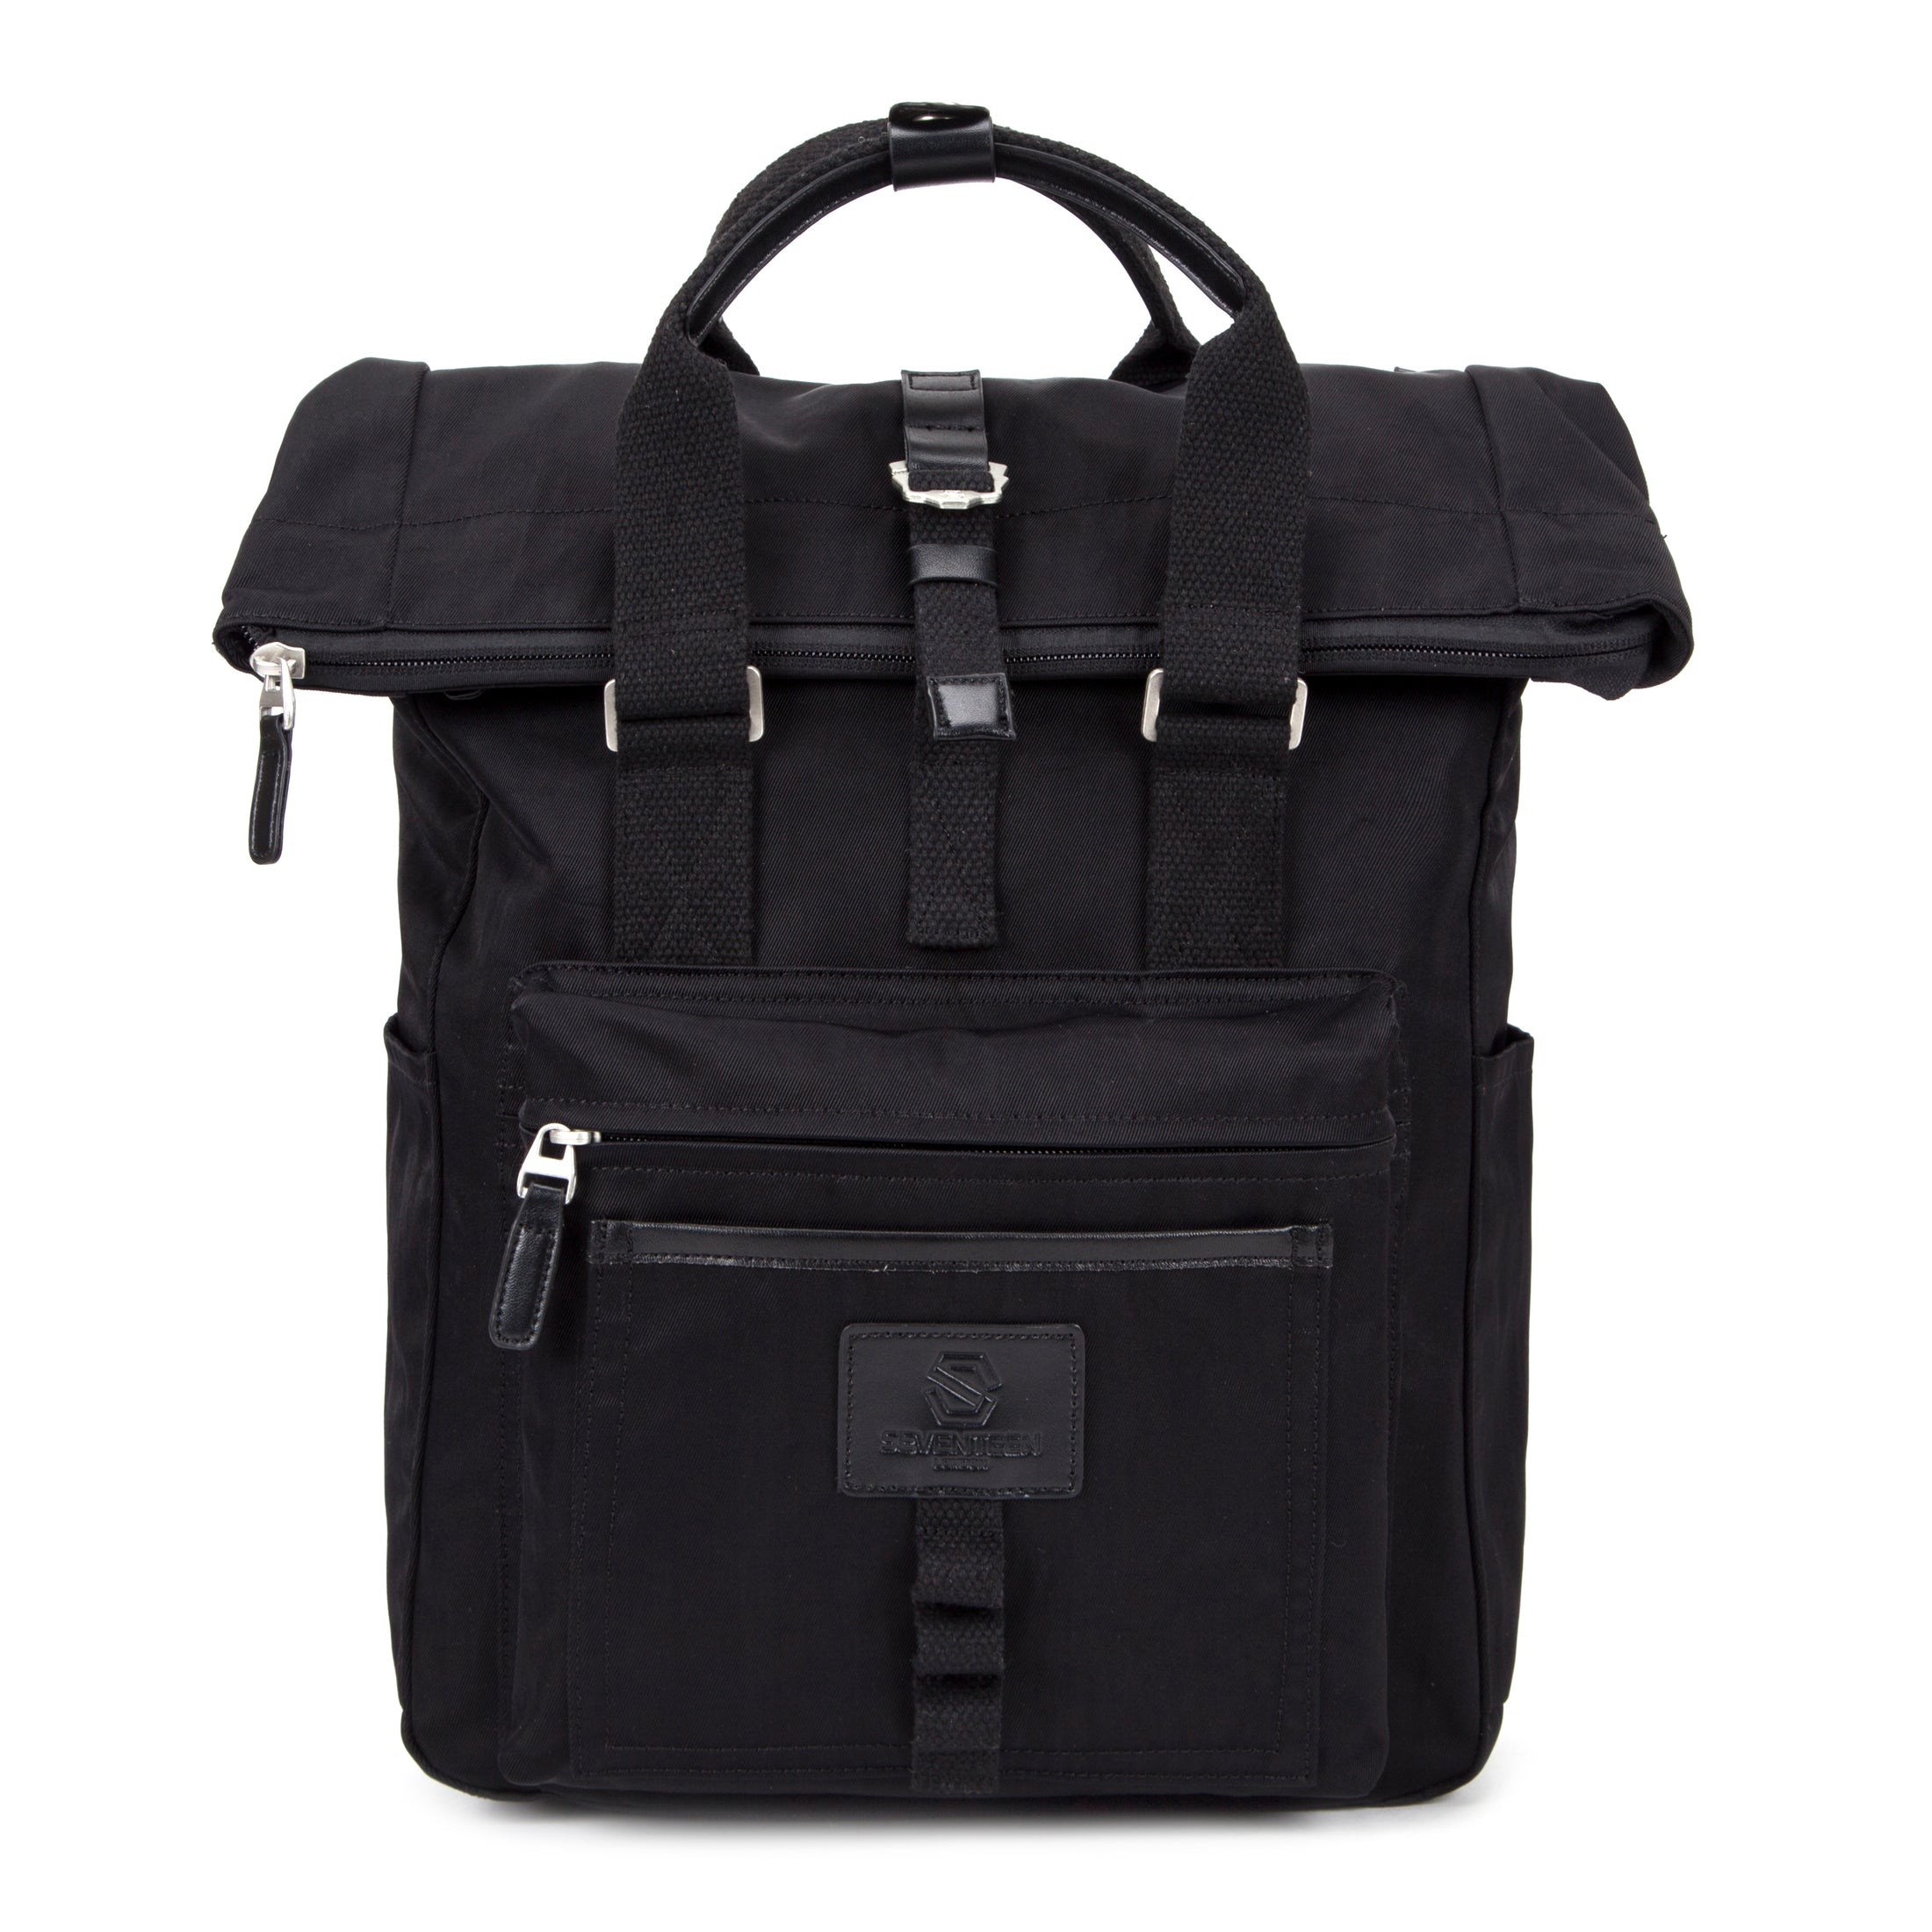 Canary Wharf Backpack - Black with Black